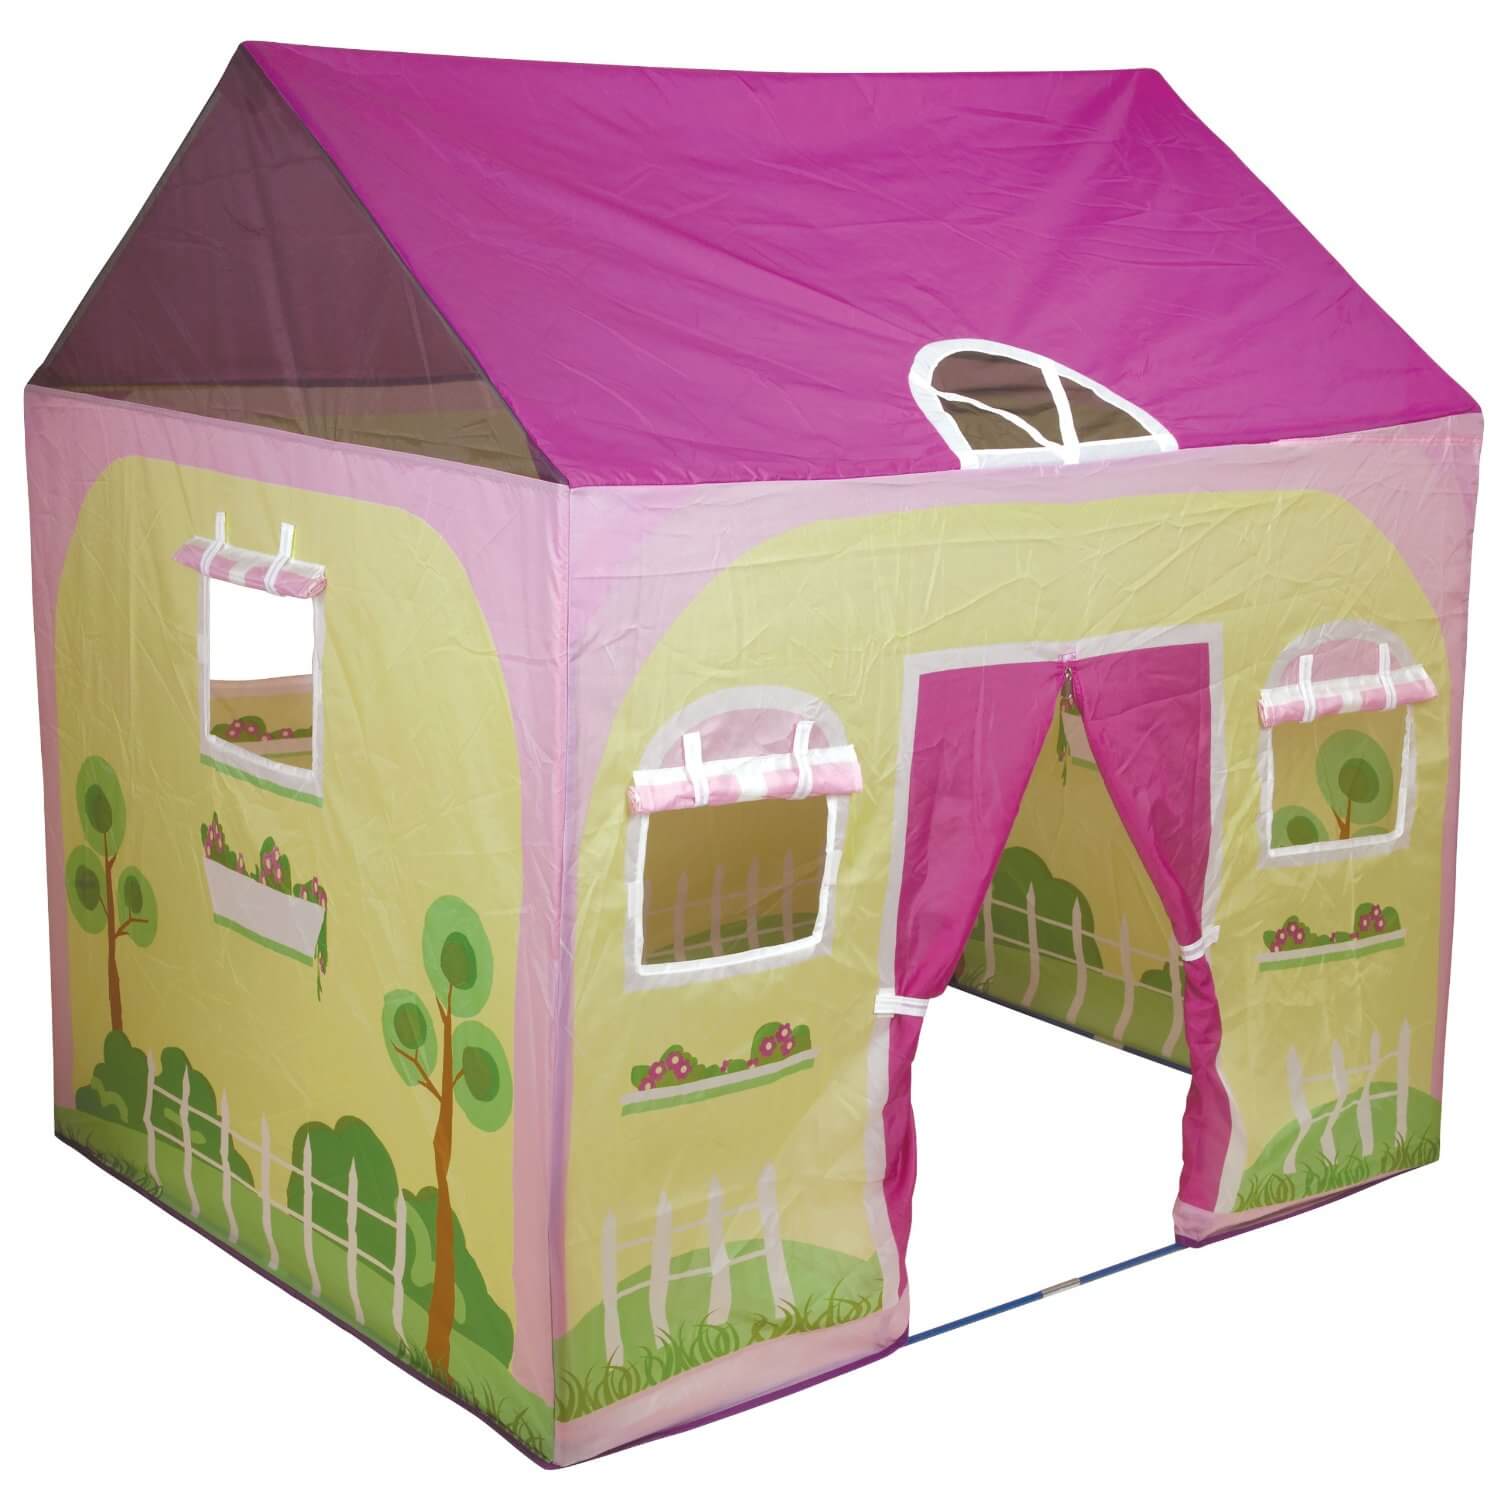 15 minute cleanup products, children's play tent for girls